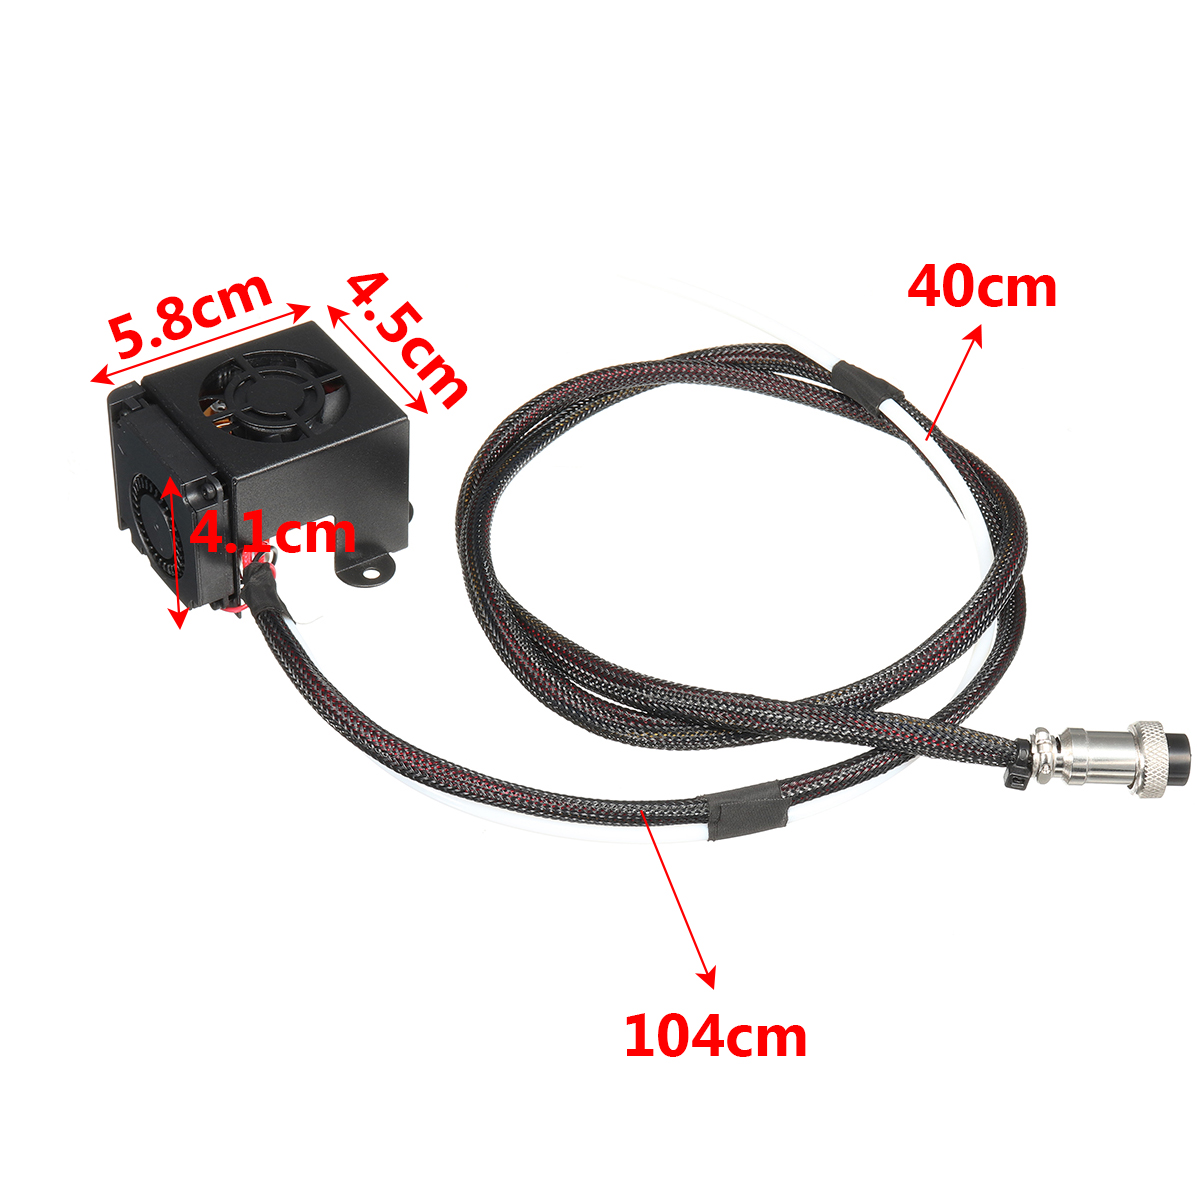 3D Printer Parts 0.4mm Nozzle Hot End Extruder Kits With Cooling Fan For Creality CR-10 12